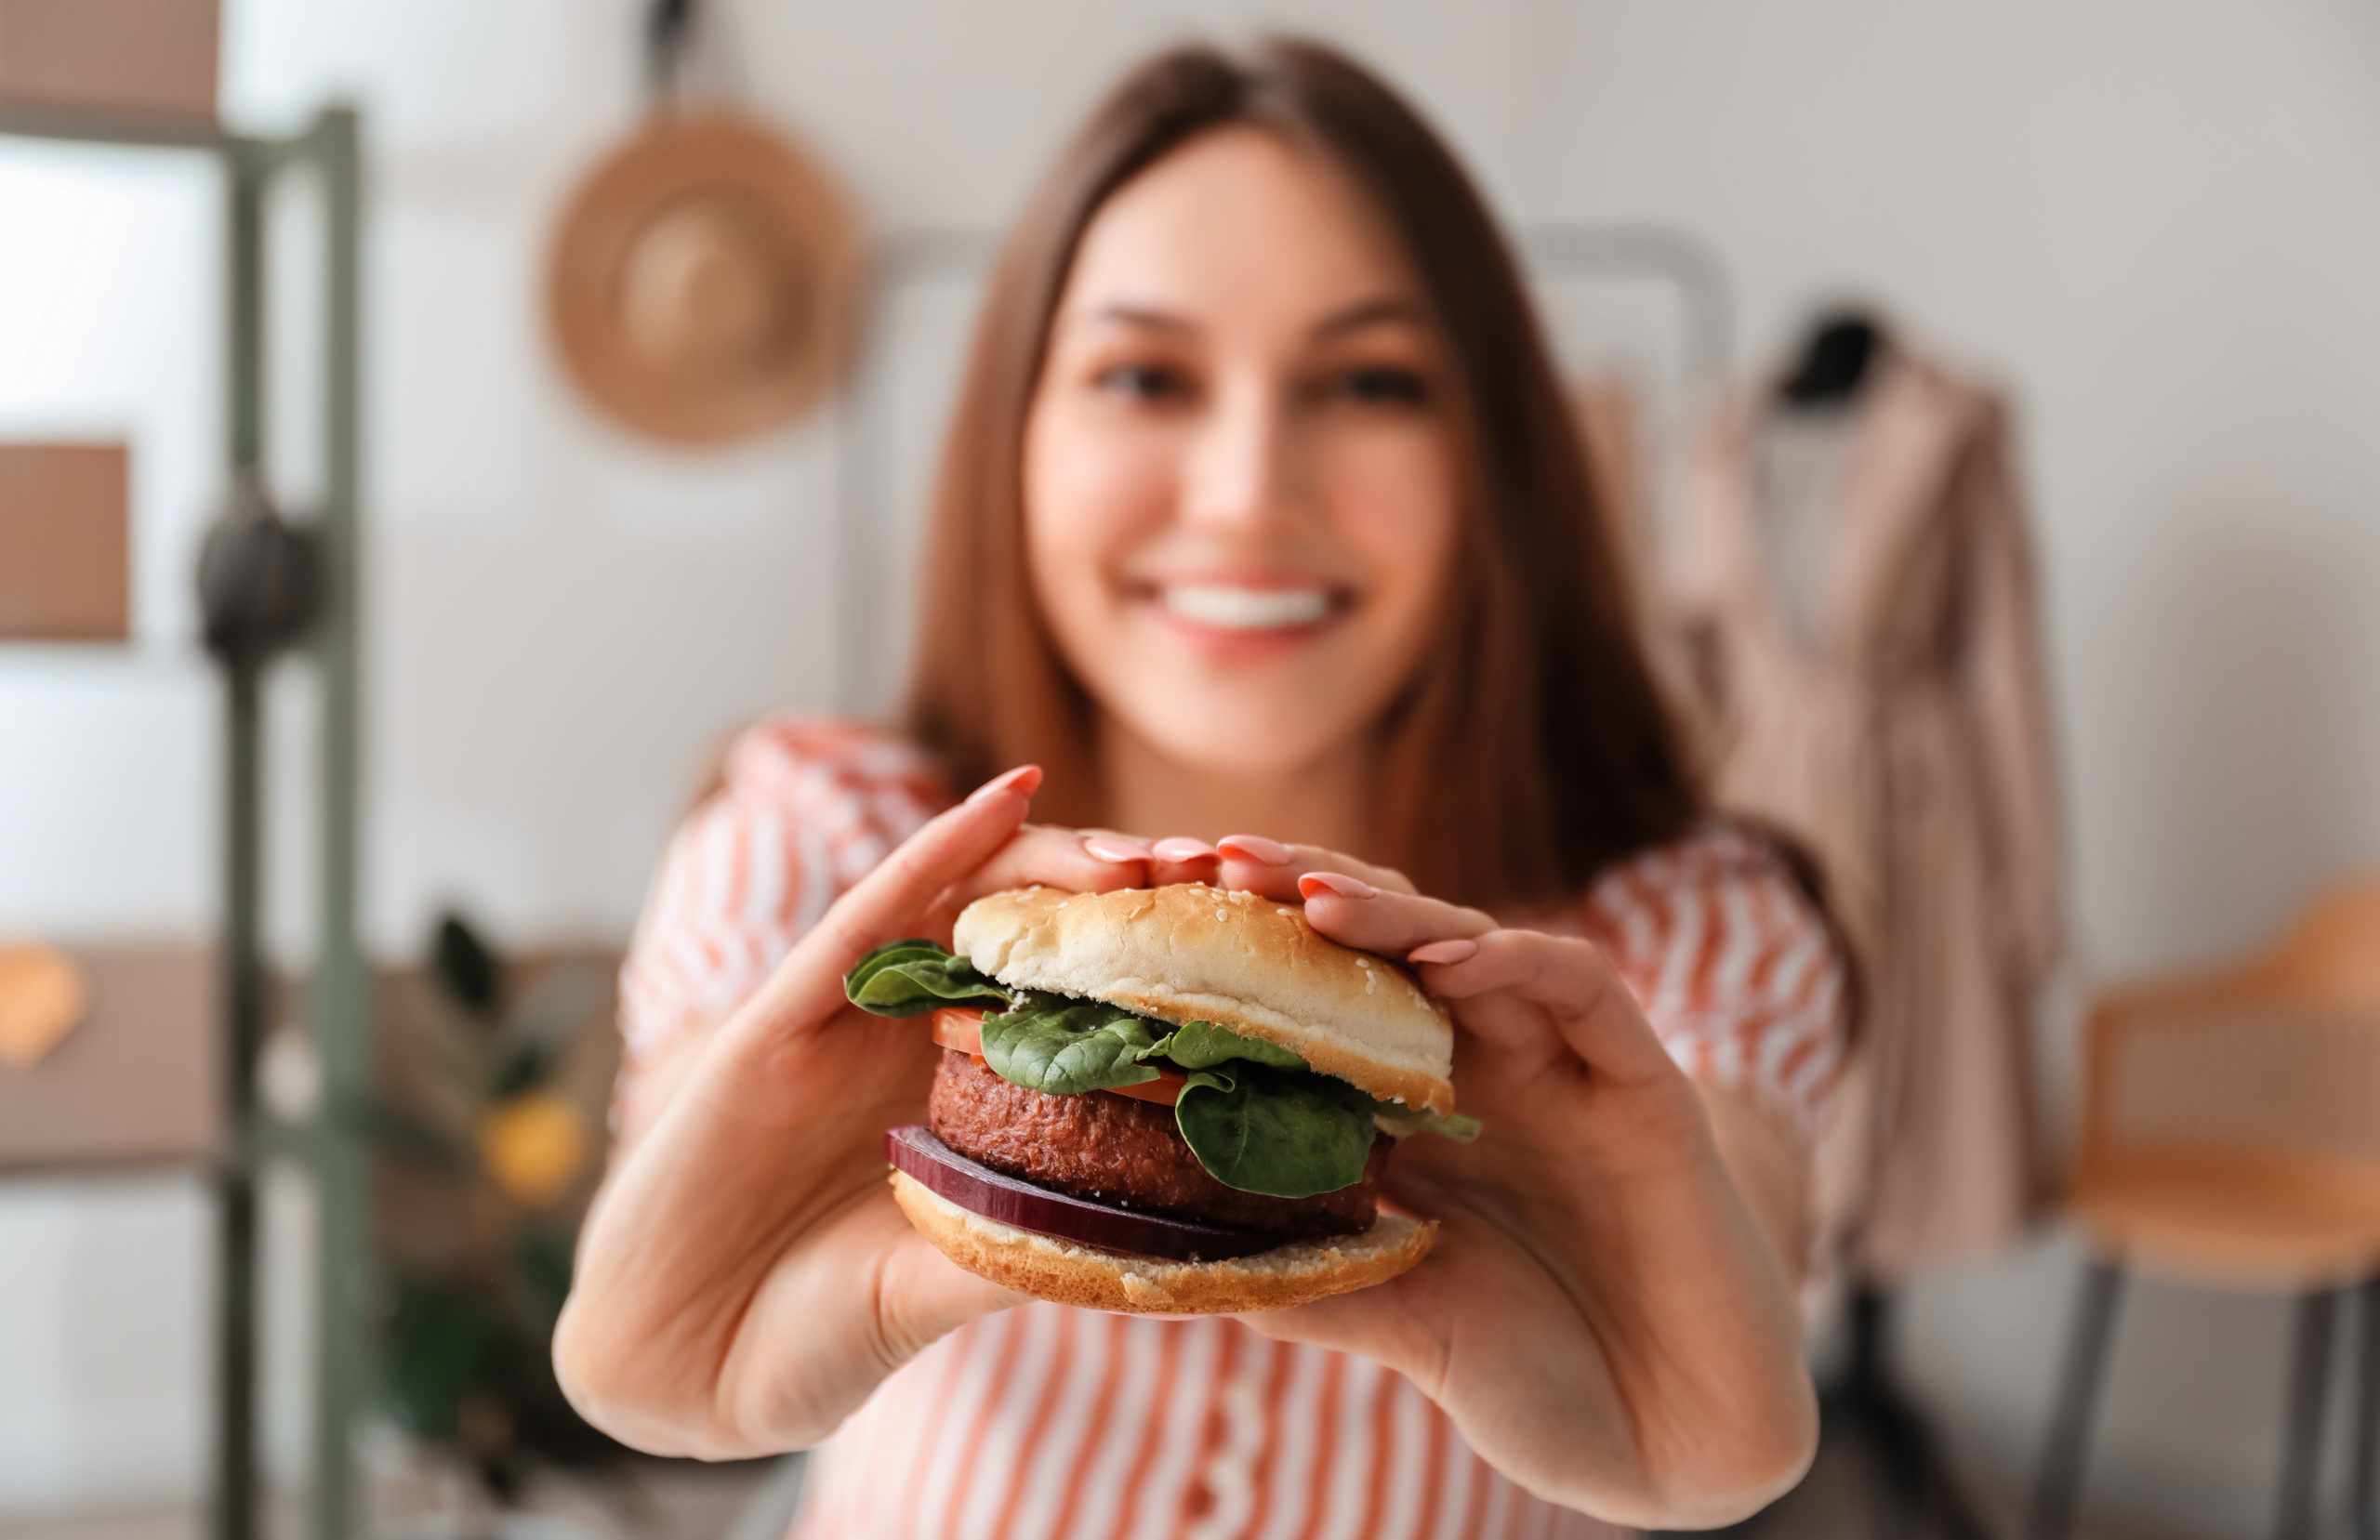 Lady holding a tasty vegan burger at workplace